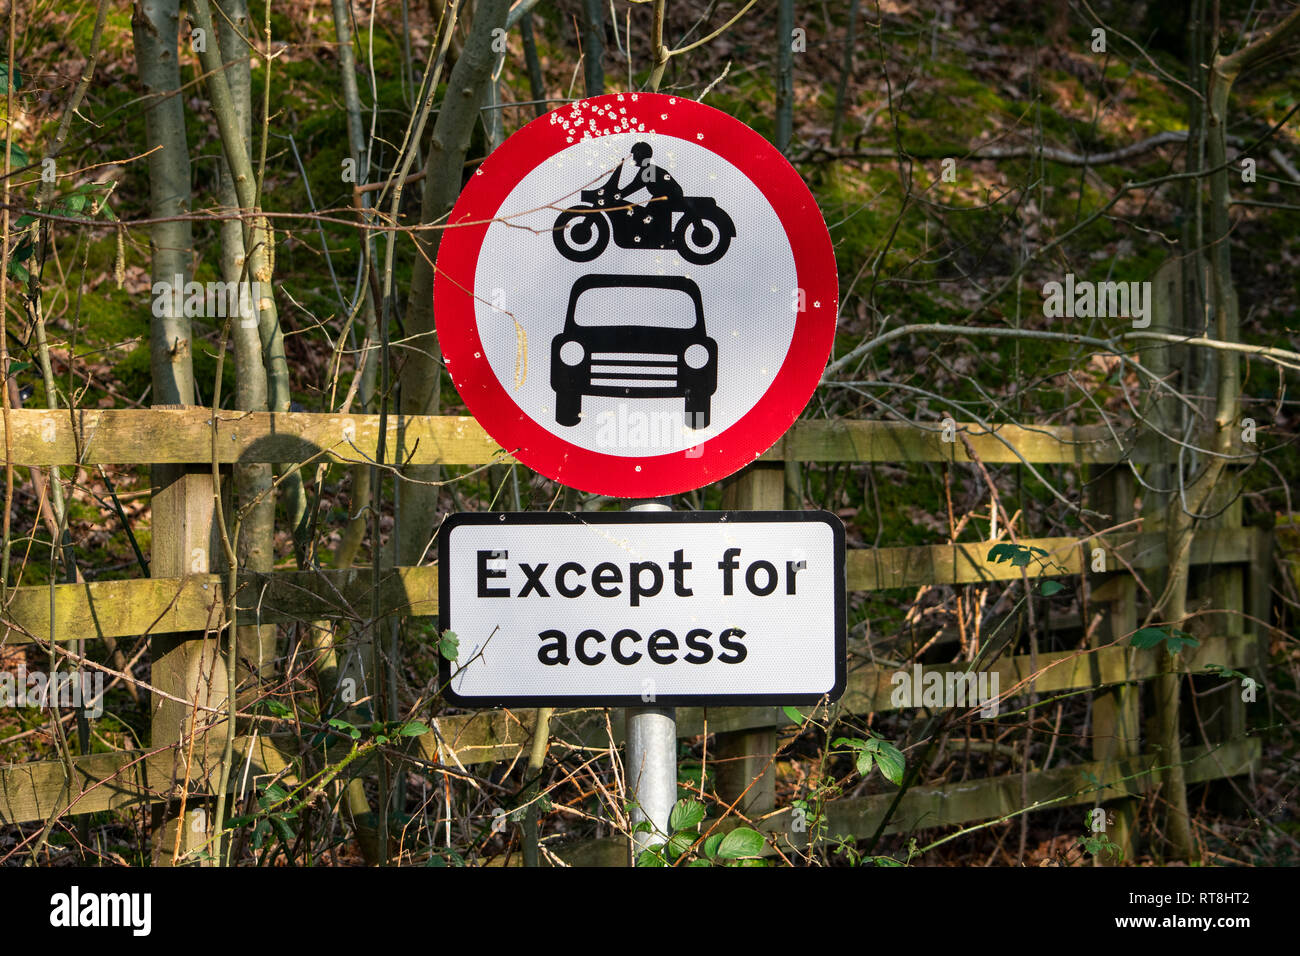 No motor vehicles except for access roadsign Stock Photo